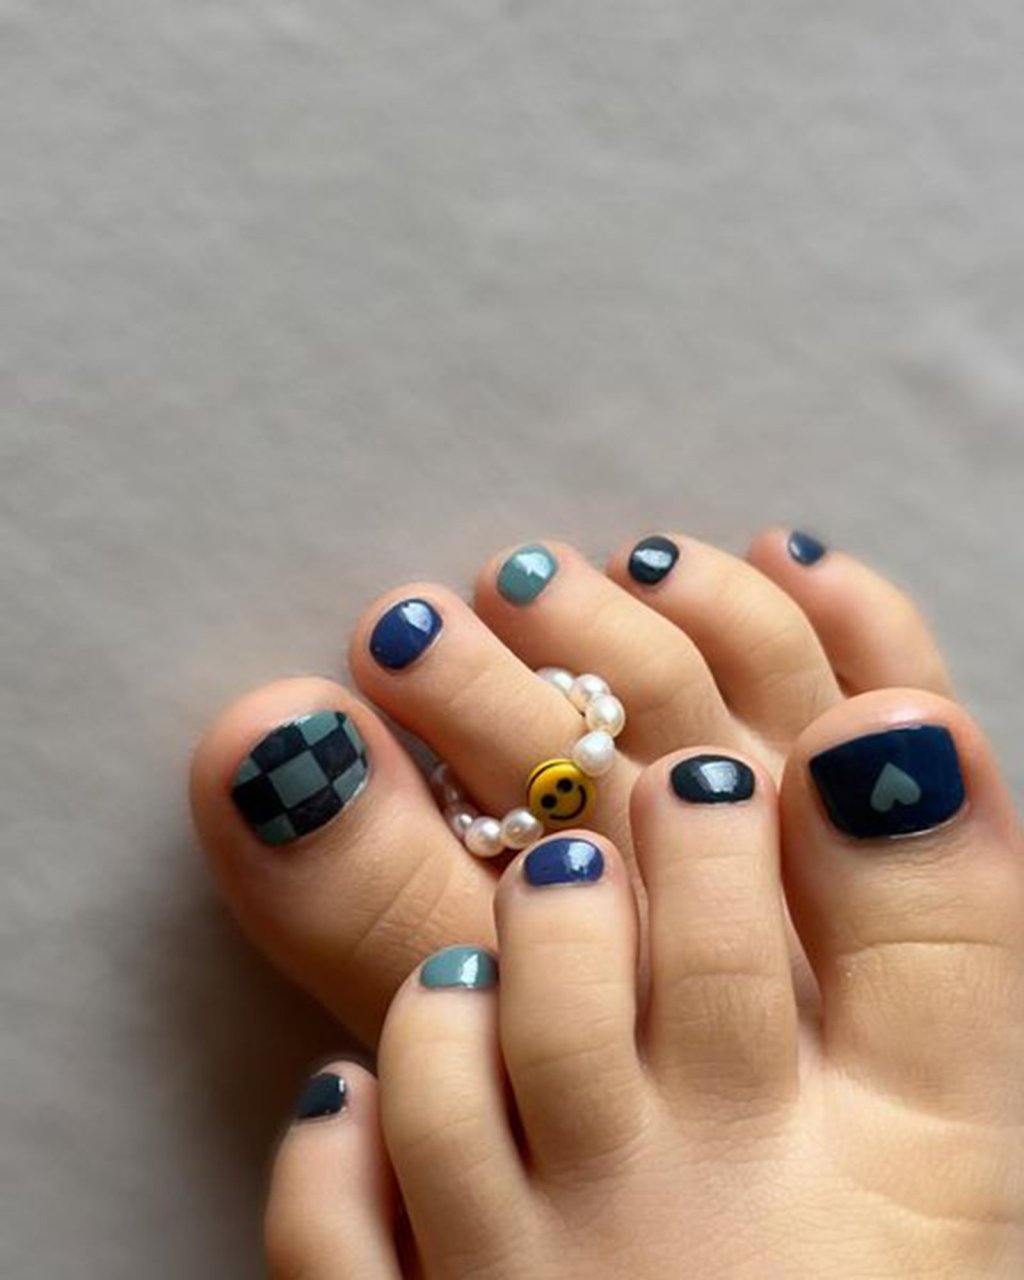 What Are The Different Types Of Pedicures, And Which Is Best?